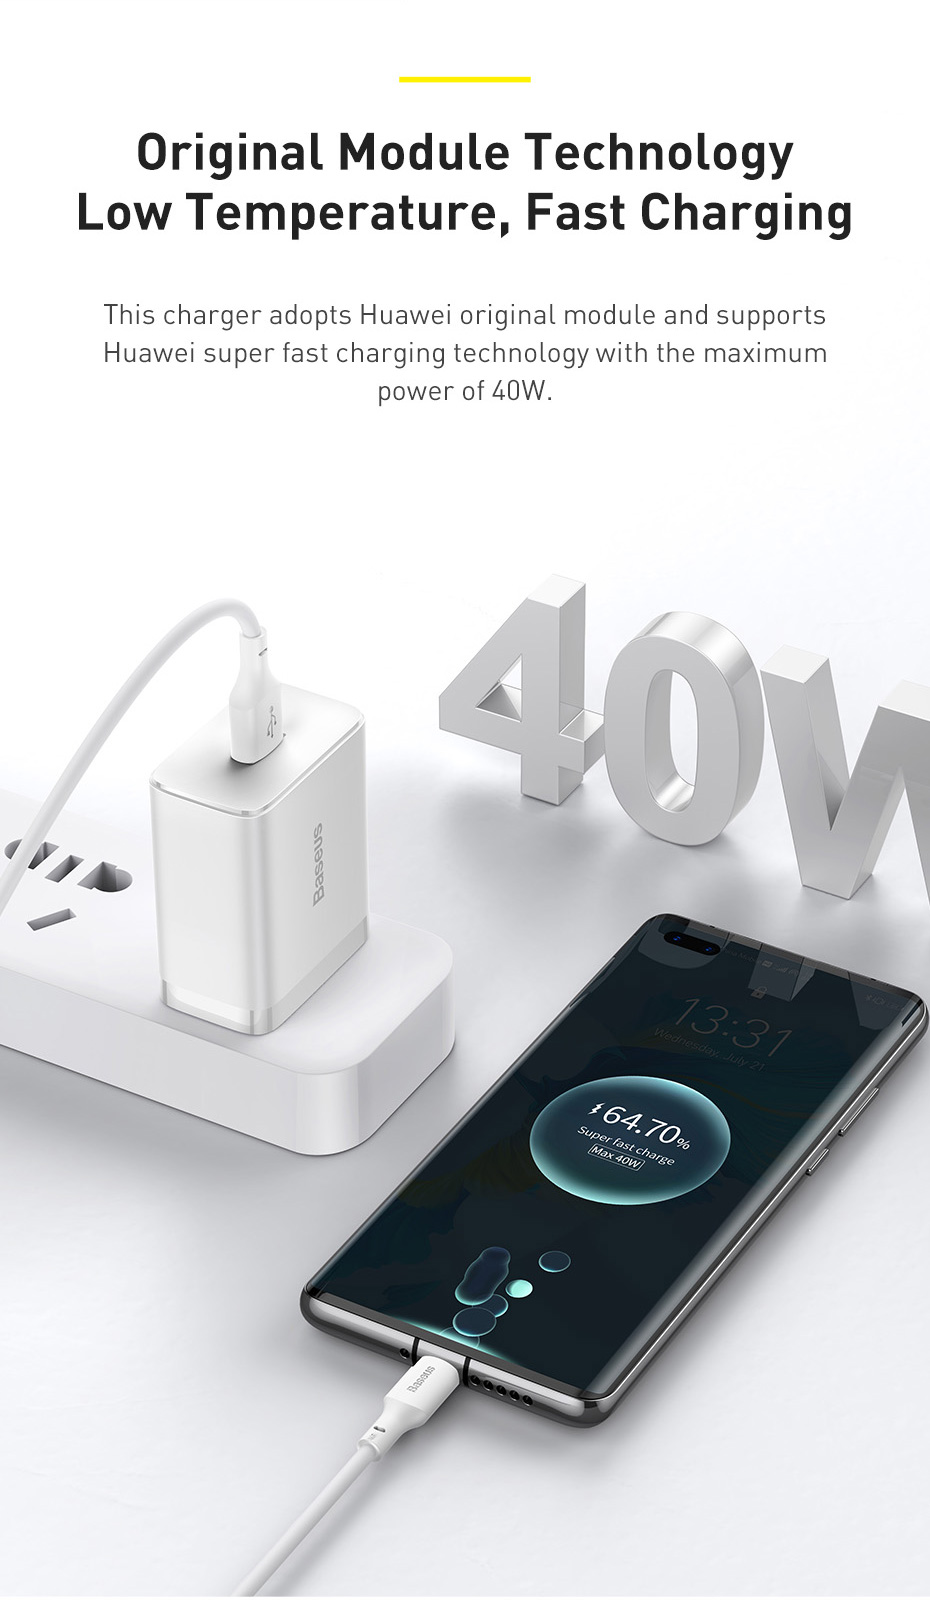 Baseus 40W Fast Charging USB Charger Wall Charger Adapter CN Plug With 5A USB to USB-C Cable For iPhone 12 Pro Max For Samsung Galaxy S21 Note S20 ultra Huawei Mate40 P50 OnePlus 9 Pro